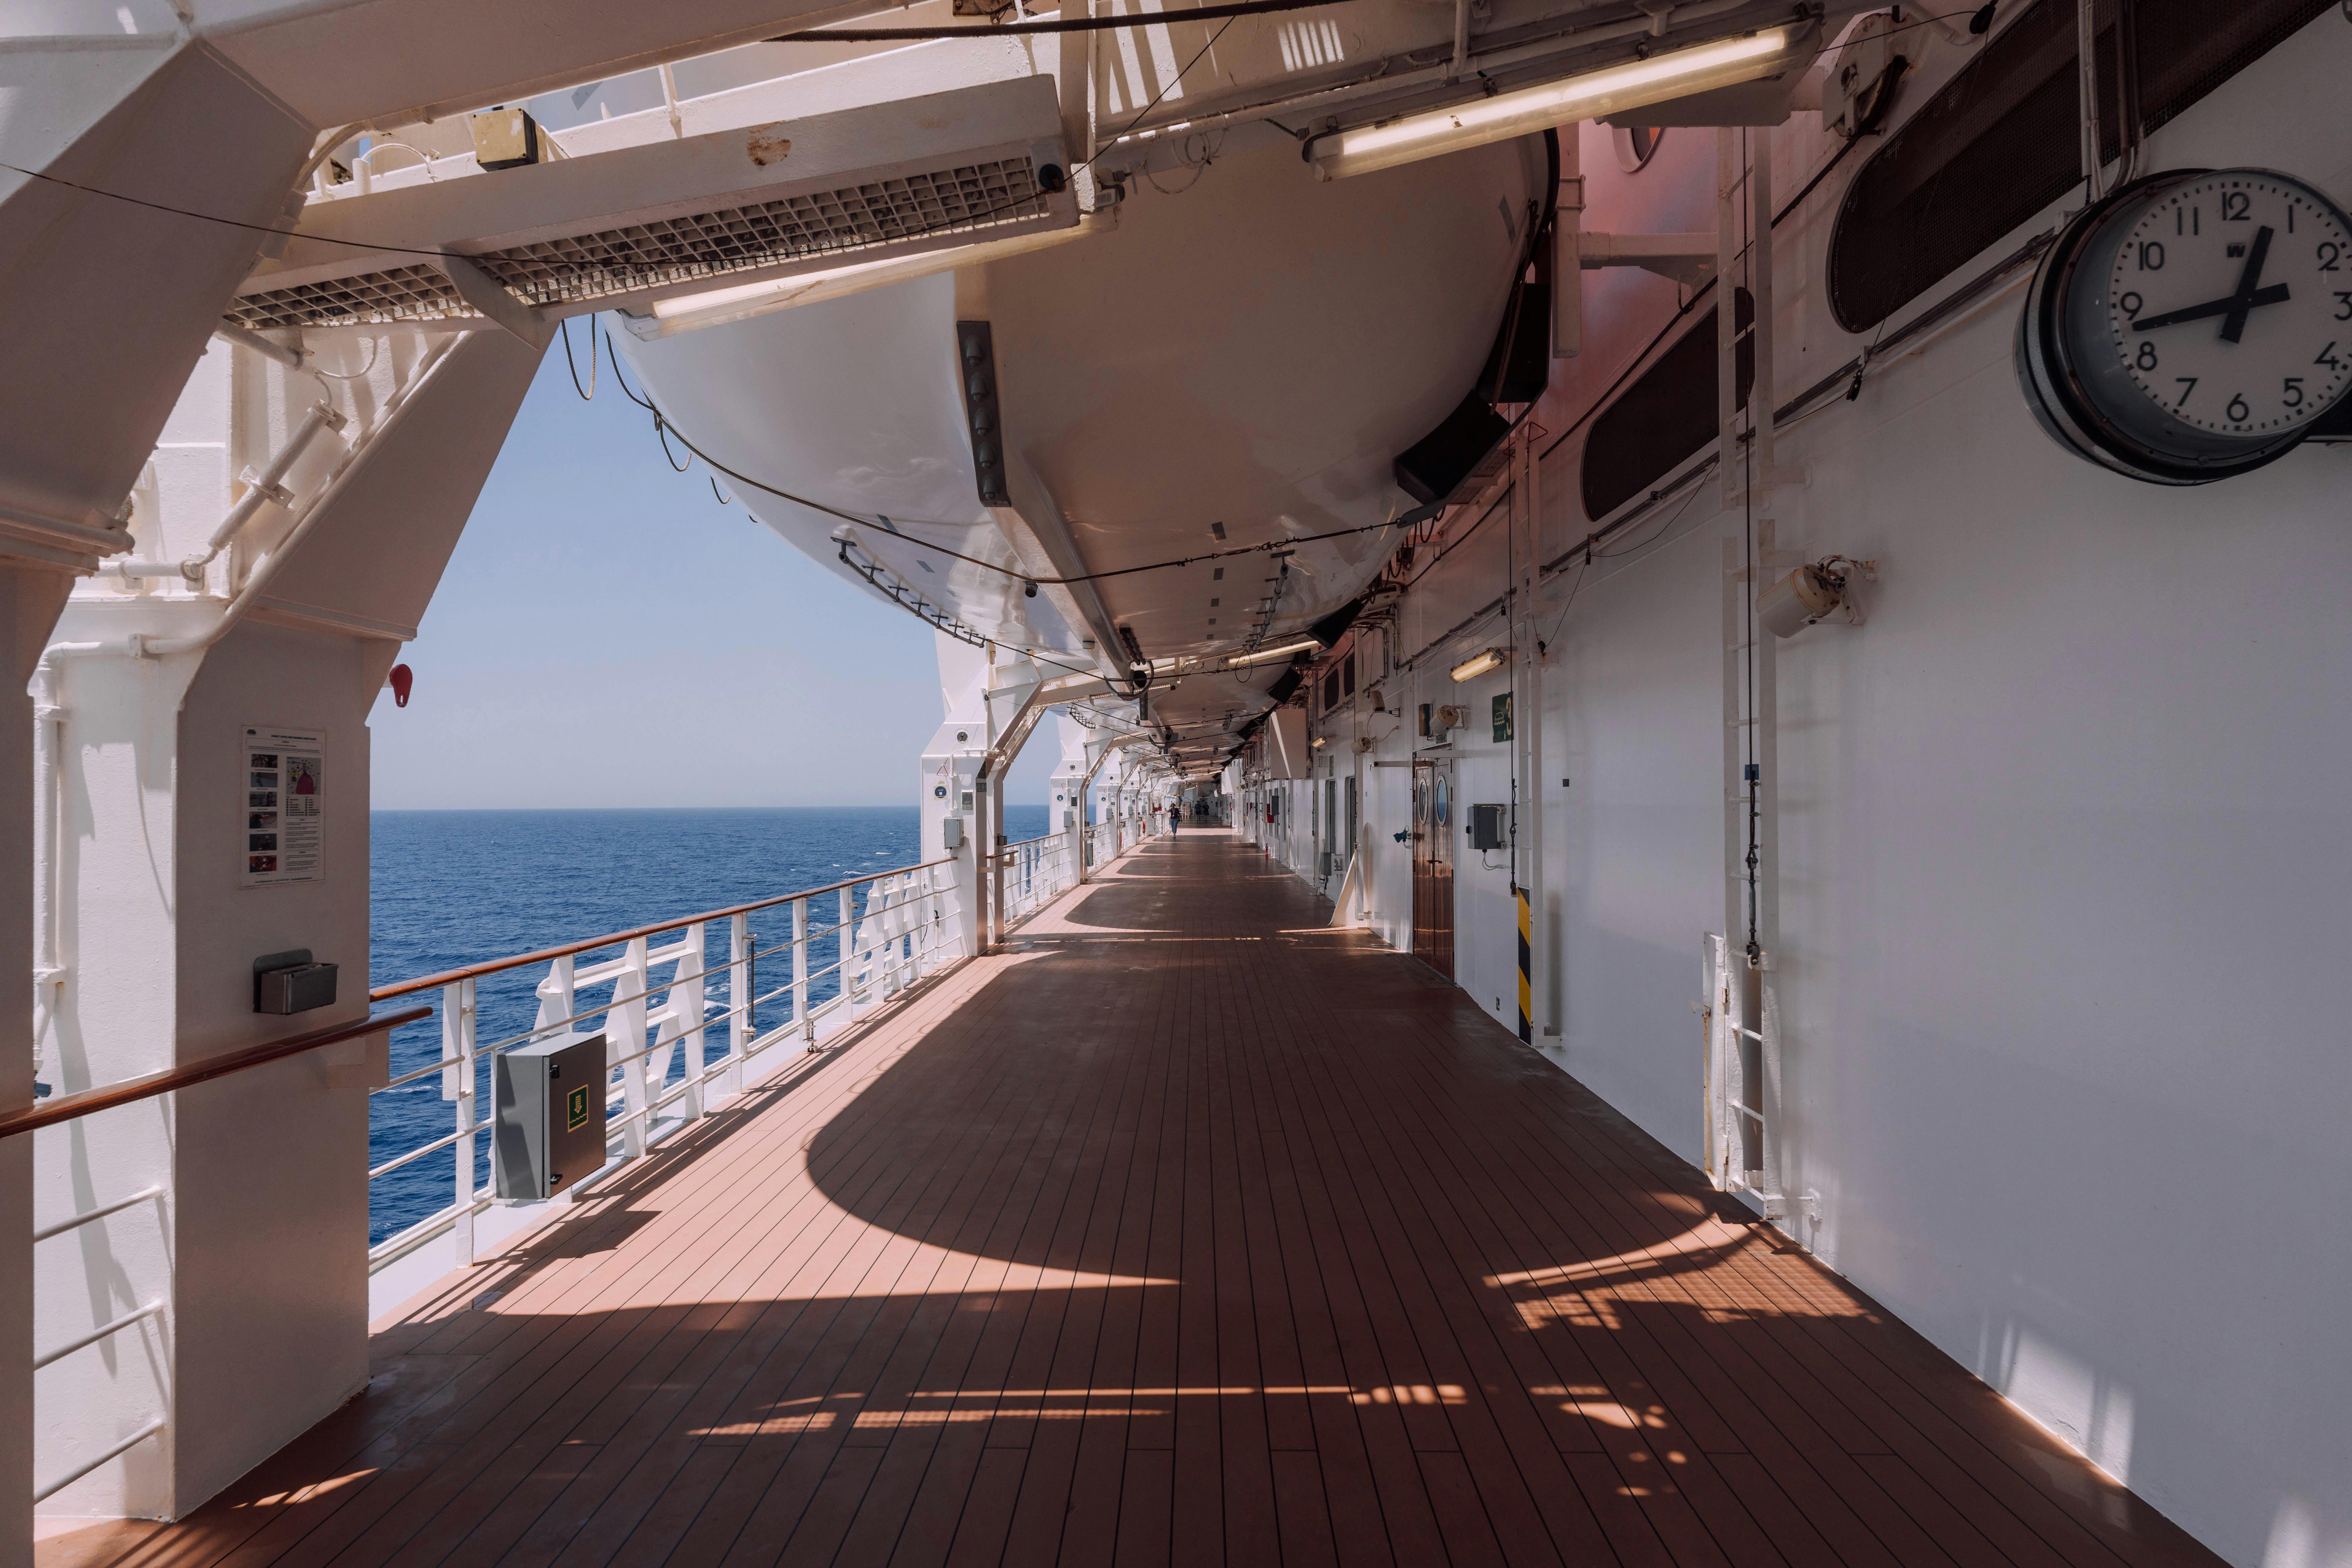 view of a promenade deck on a cruise ship